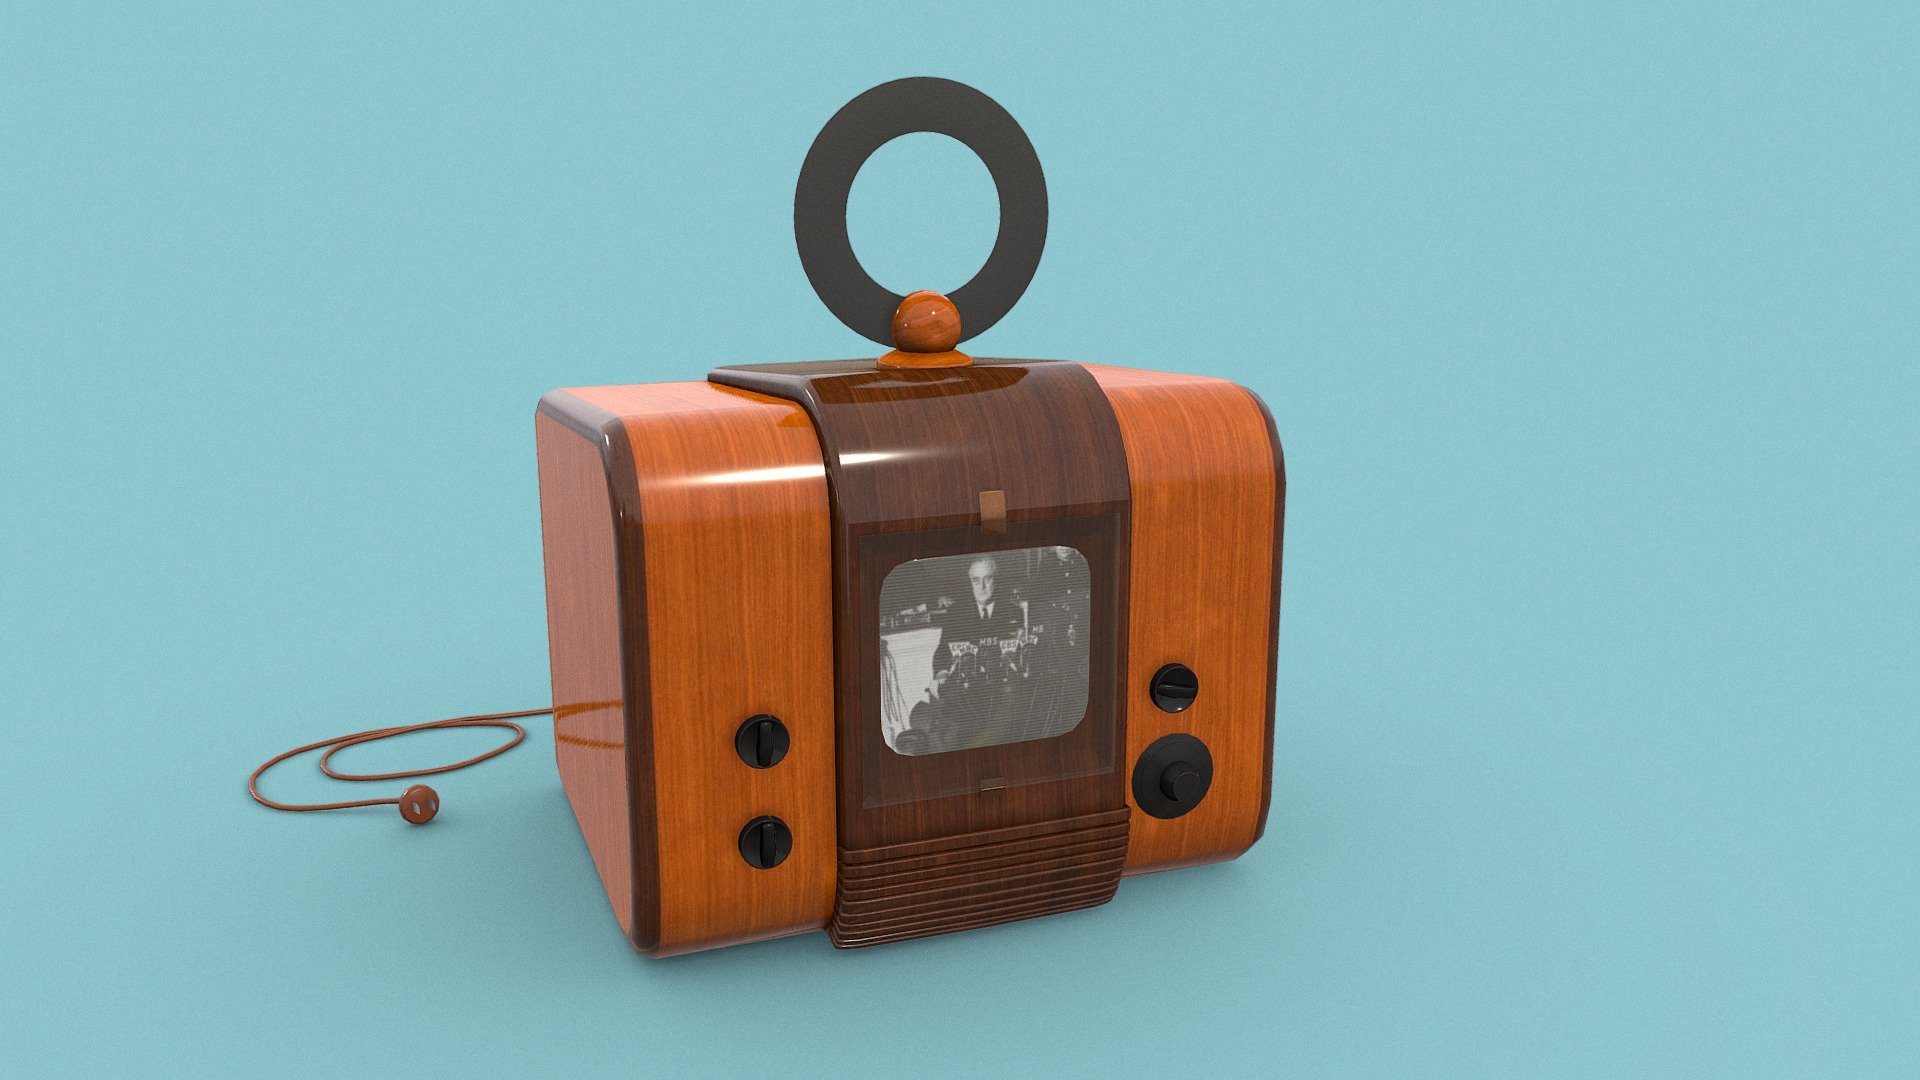 Dubbed the woLT Vector
I modeled after the styles of the early &ldquo;picture tubes' of the 1940s this model is game &amp; render ready &amp; optimized for VR 
The textures were hand crafted brands and  the labelings are entirely ficticious 3d model